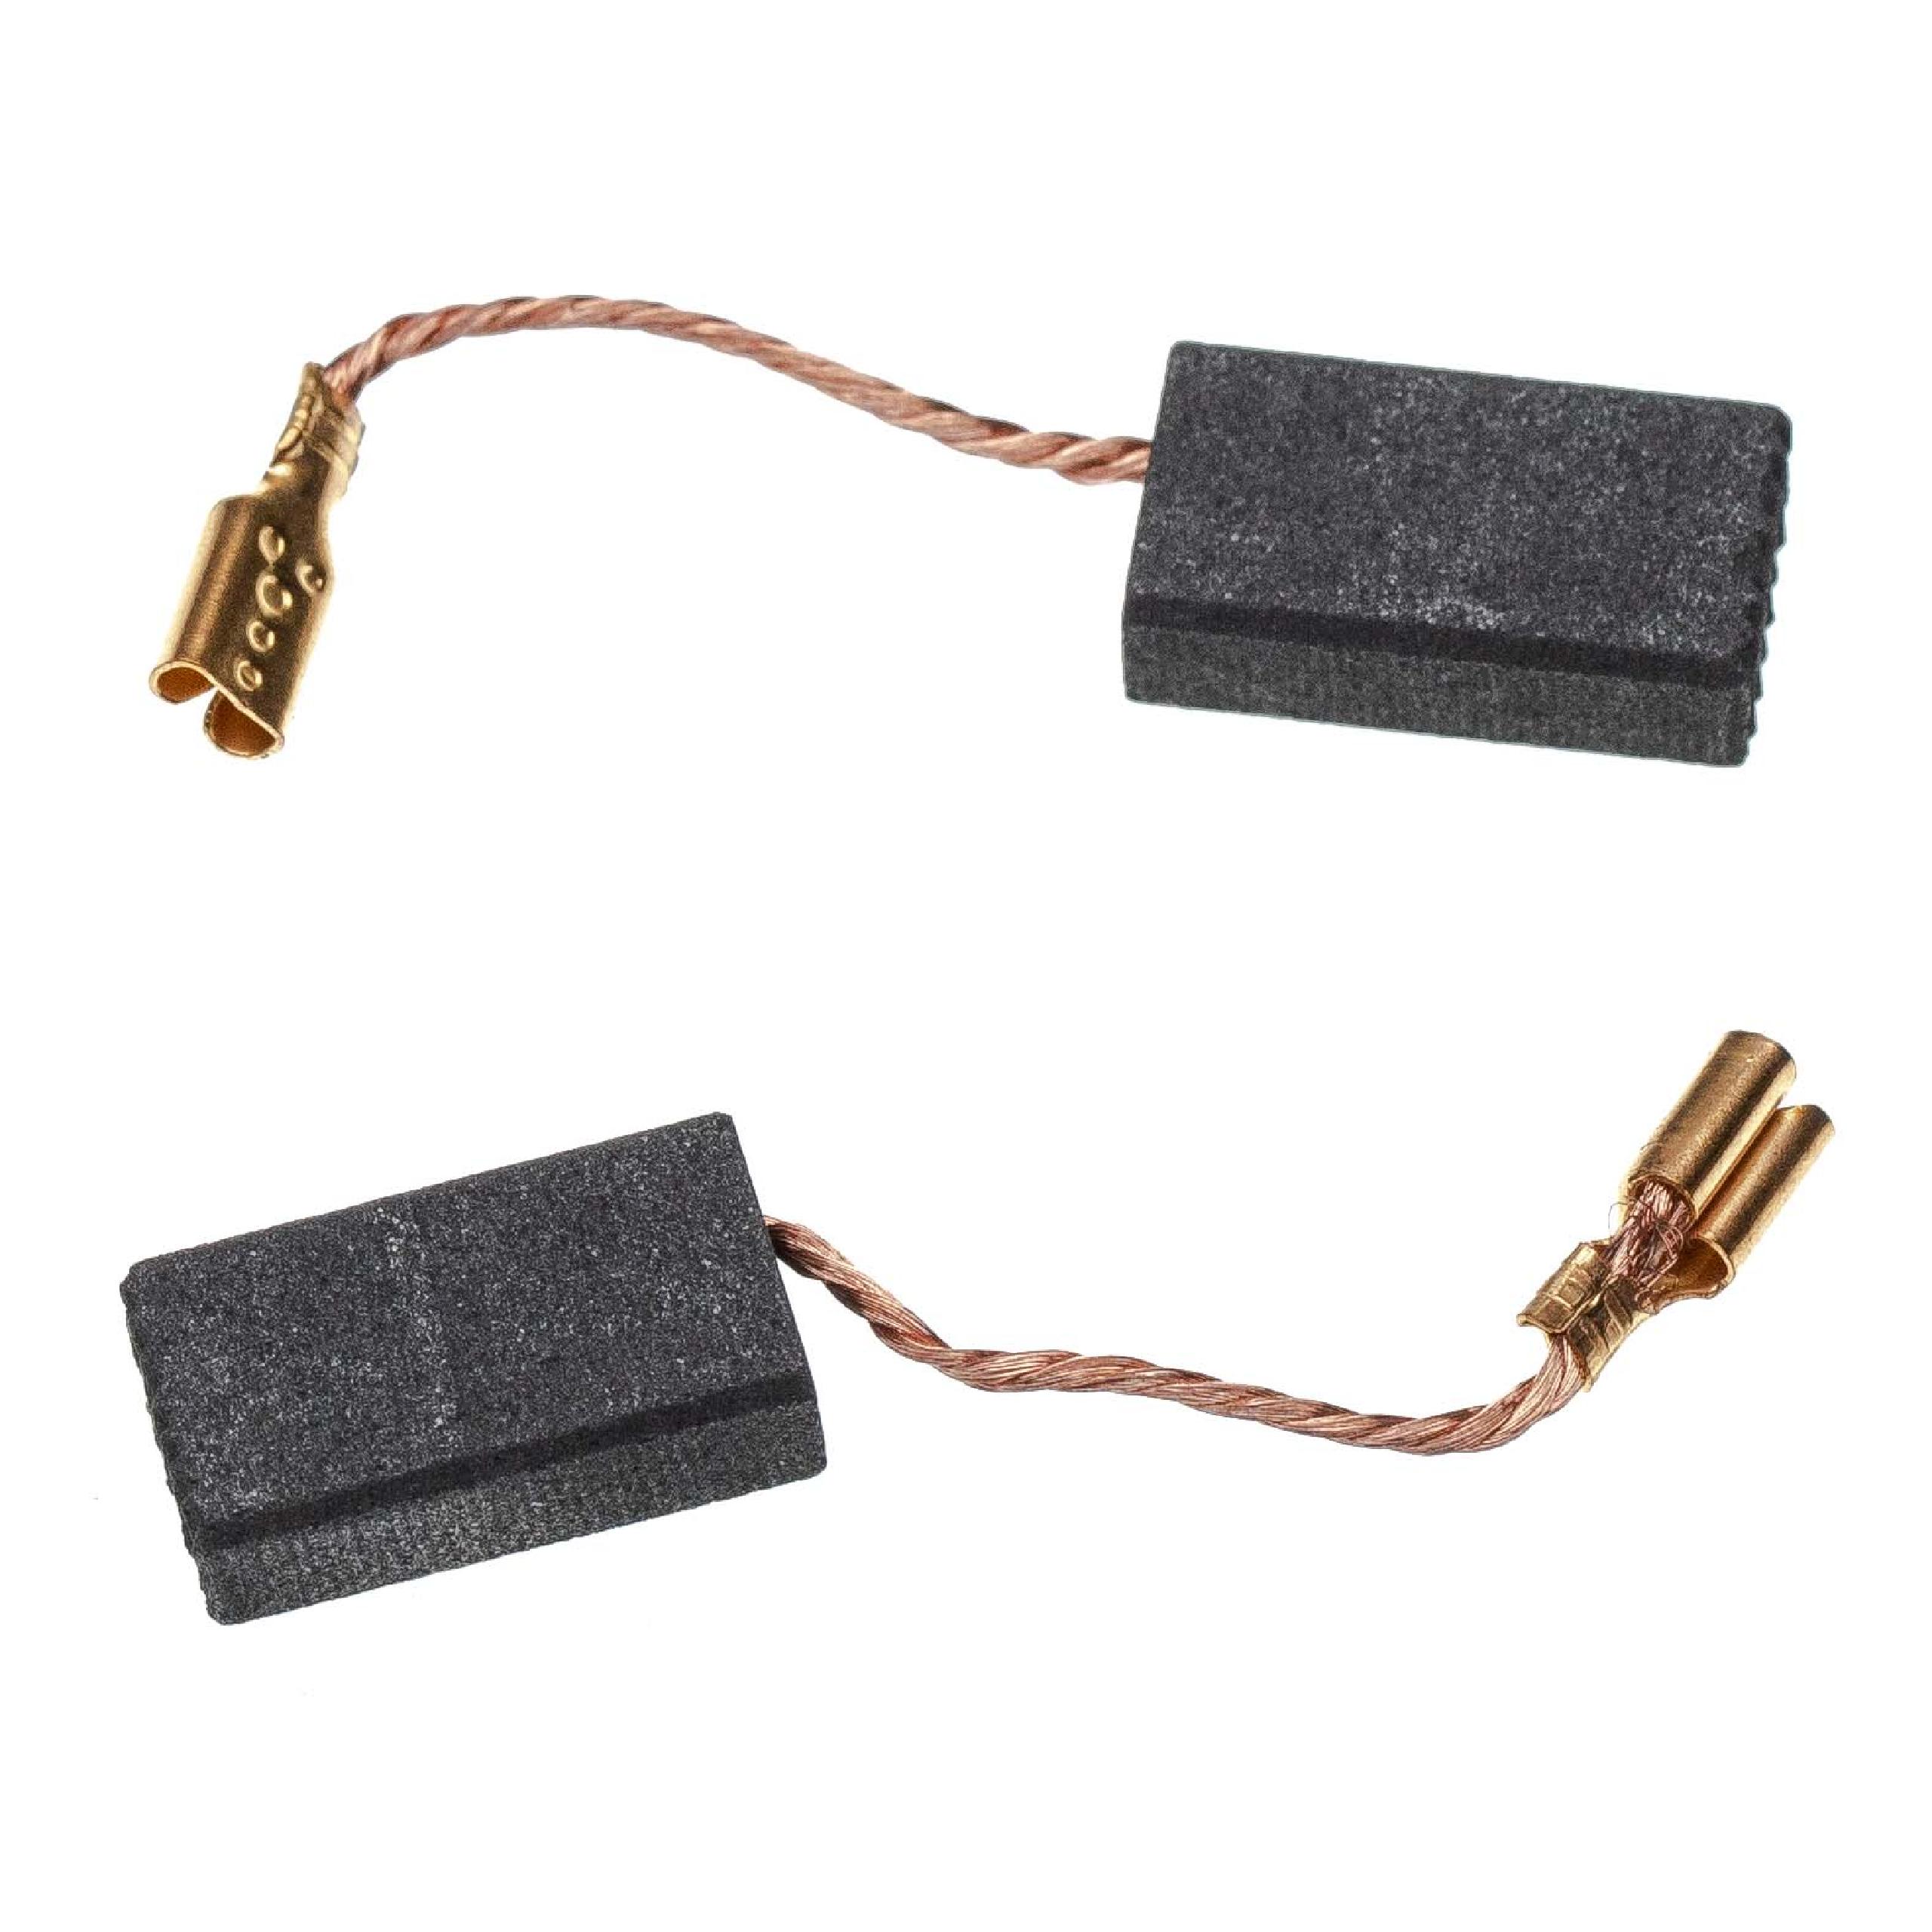 2x Carbon Brush as Replacement for AEG 305420, 305421, 318213, 318214 Electric Power Tools, 15 x 8 x 5mm